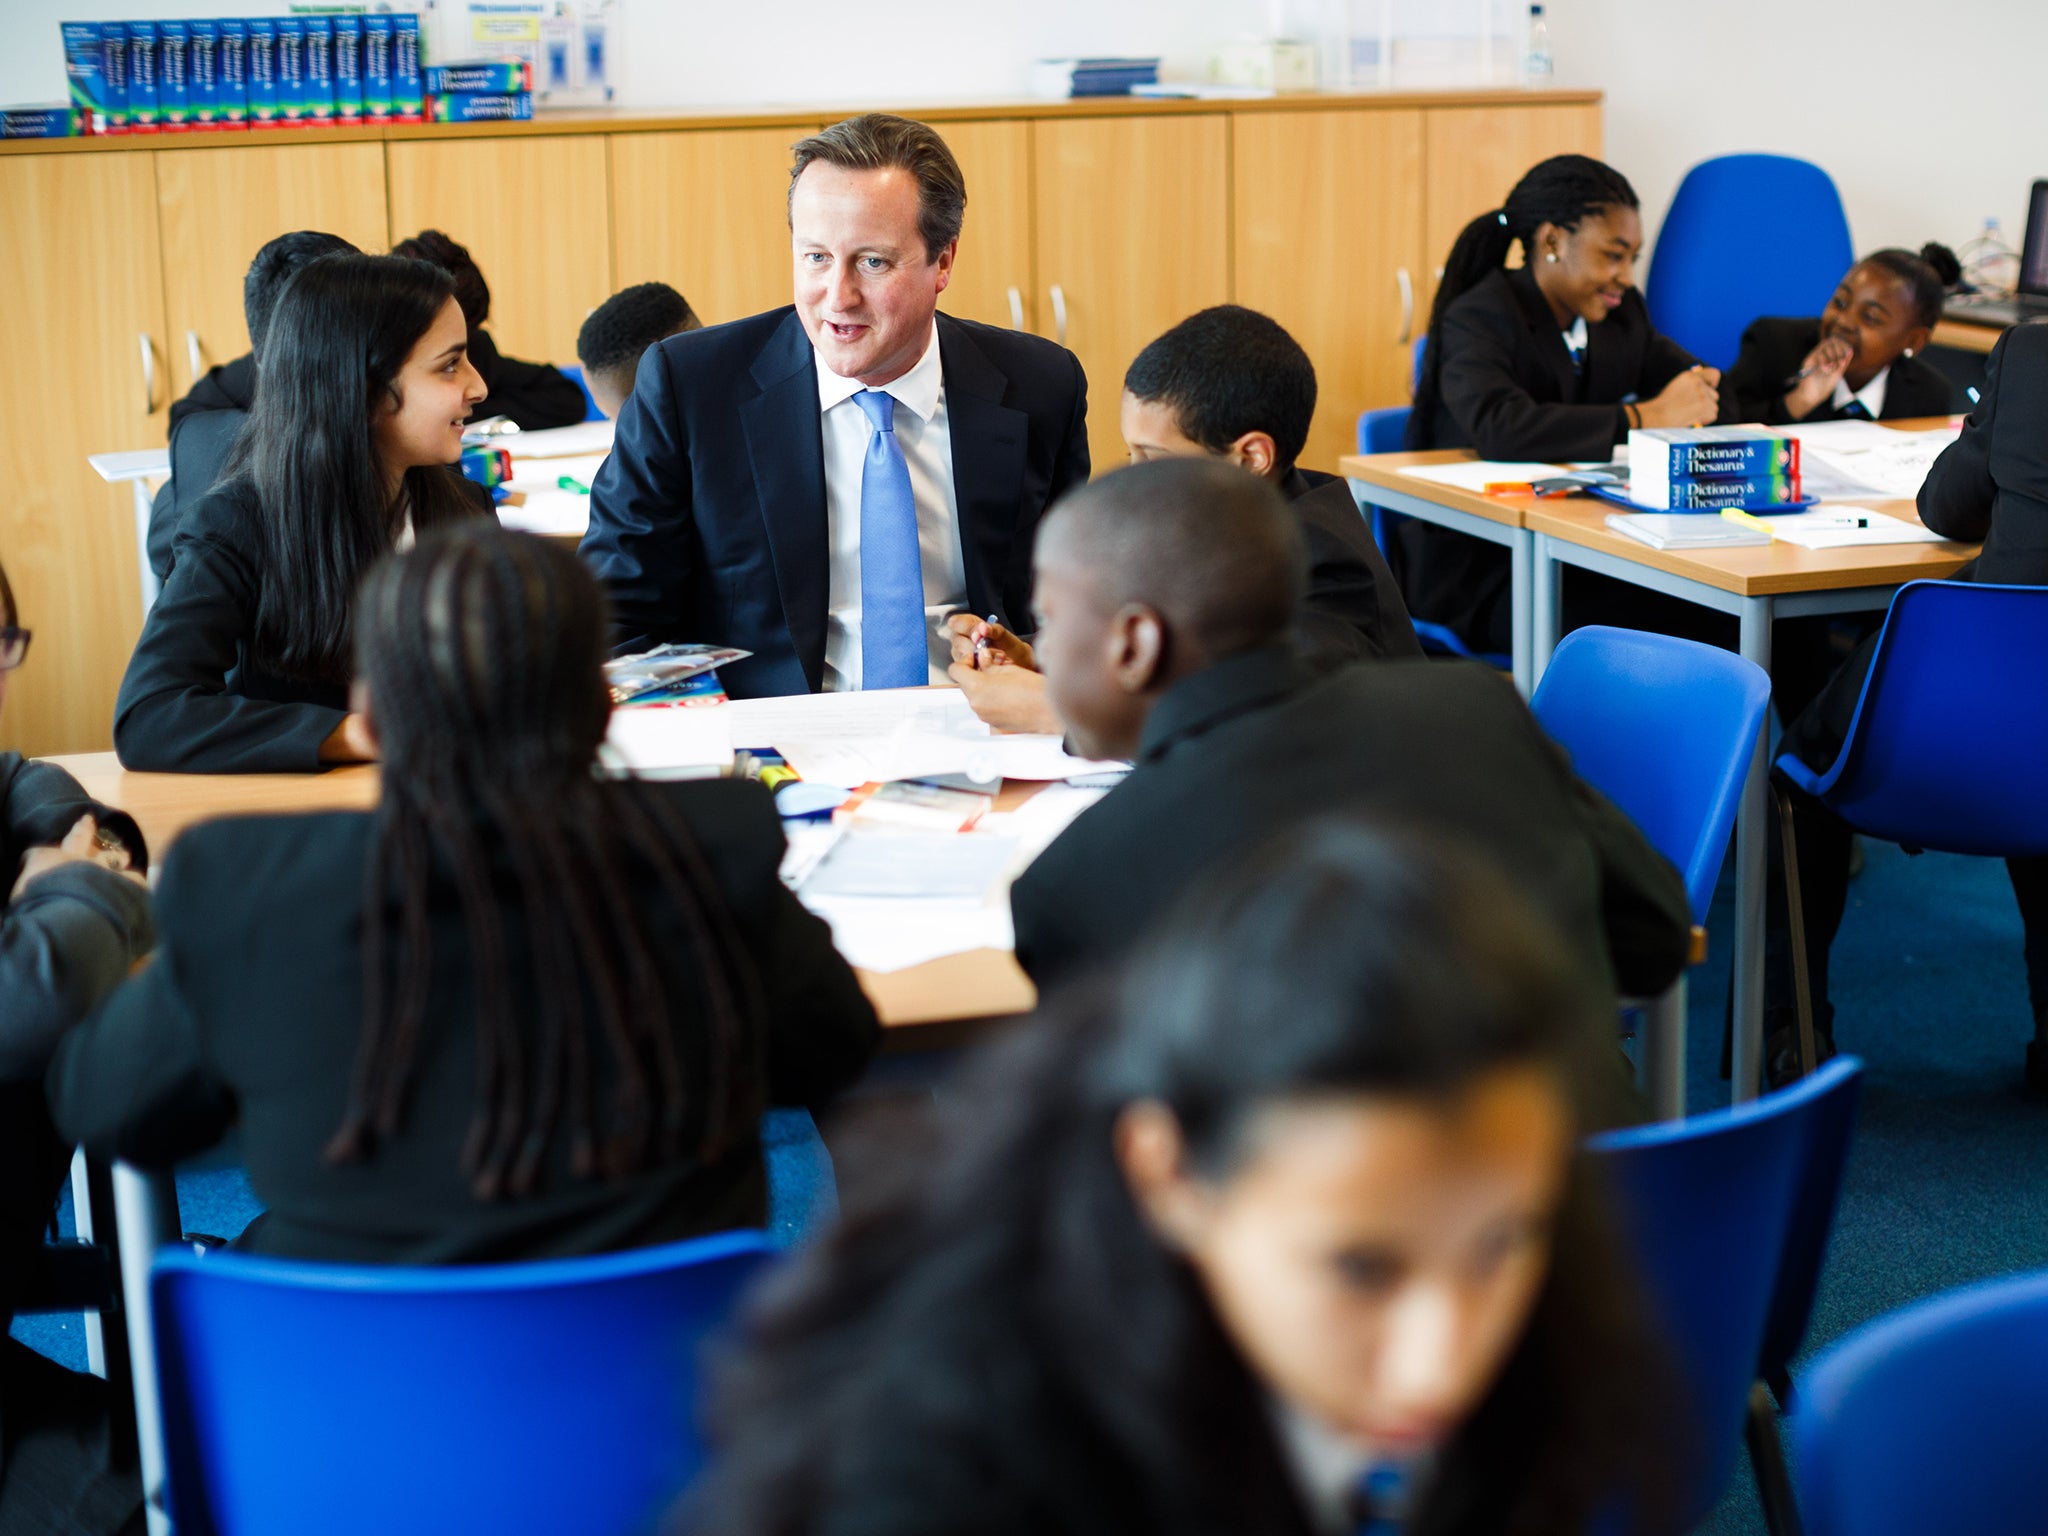 The Prime Minister attending a class at Perry Beeches III Free School in Birmingham in 2013; he has admitted that state funding per pupil will fall in real terms over the next five years under the Conservatives (Getty)